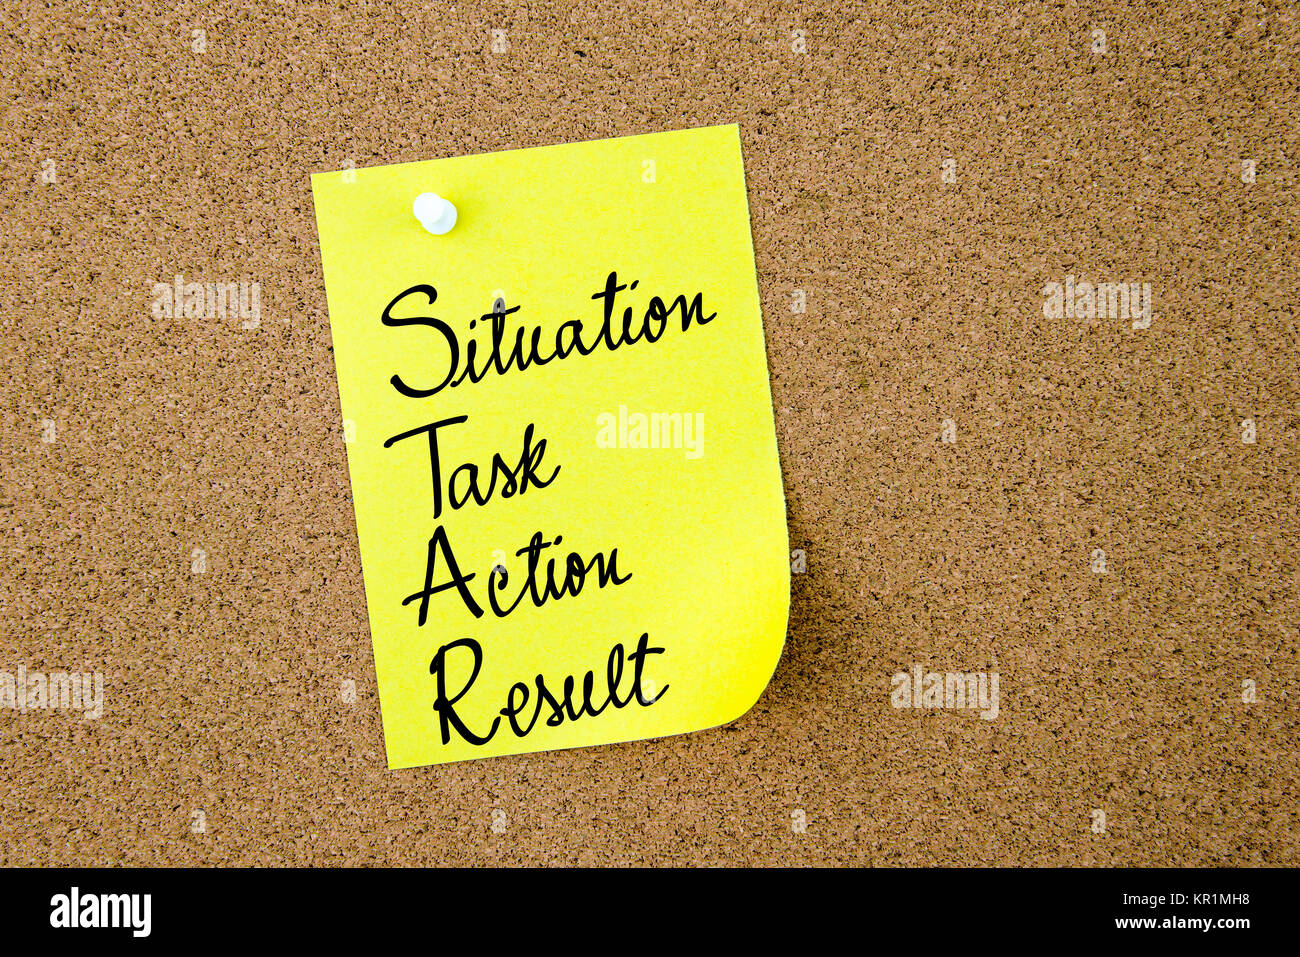 STAR as Situation, Task, Action, Result written on yellow paper ...